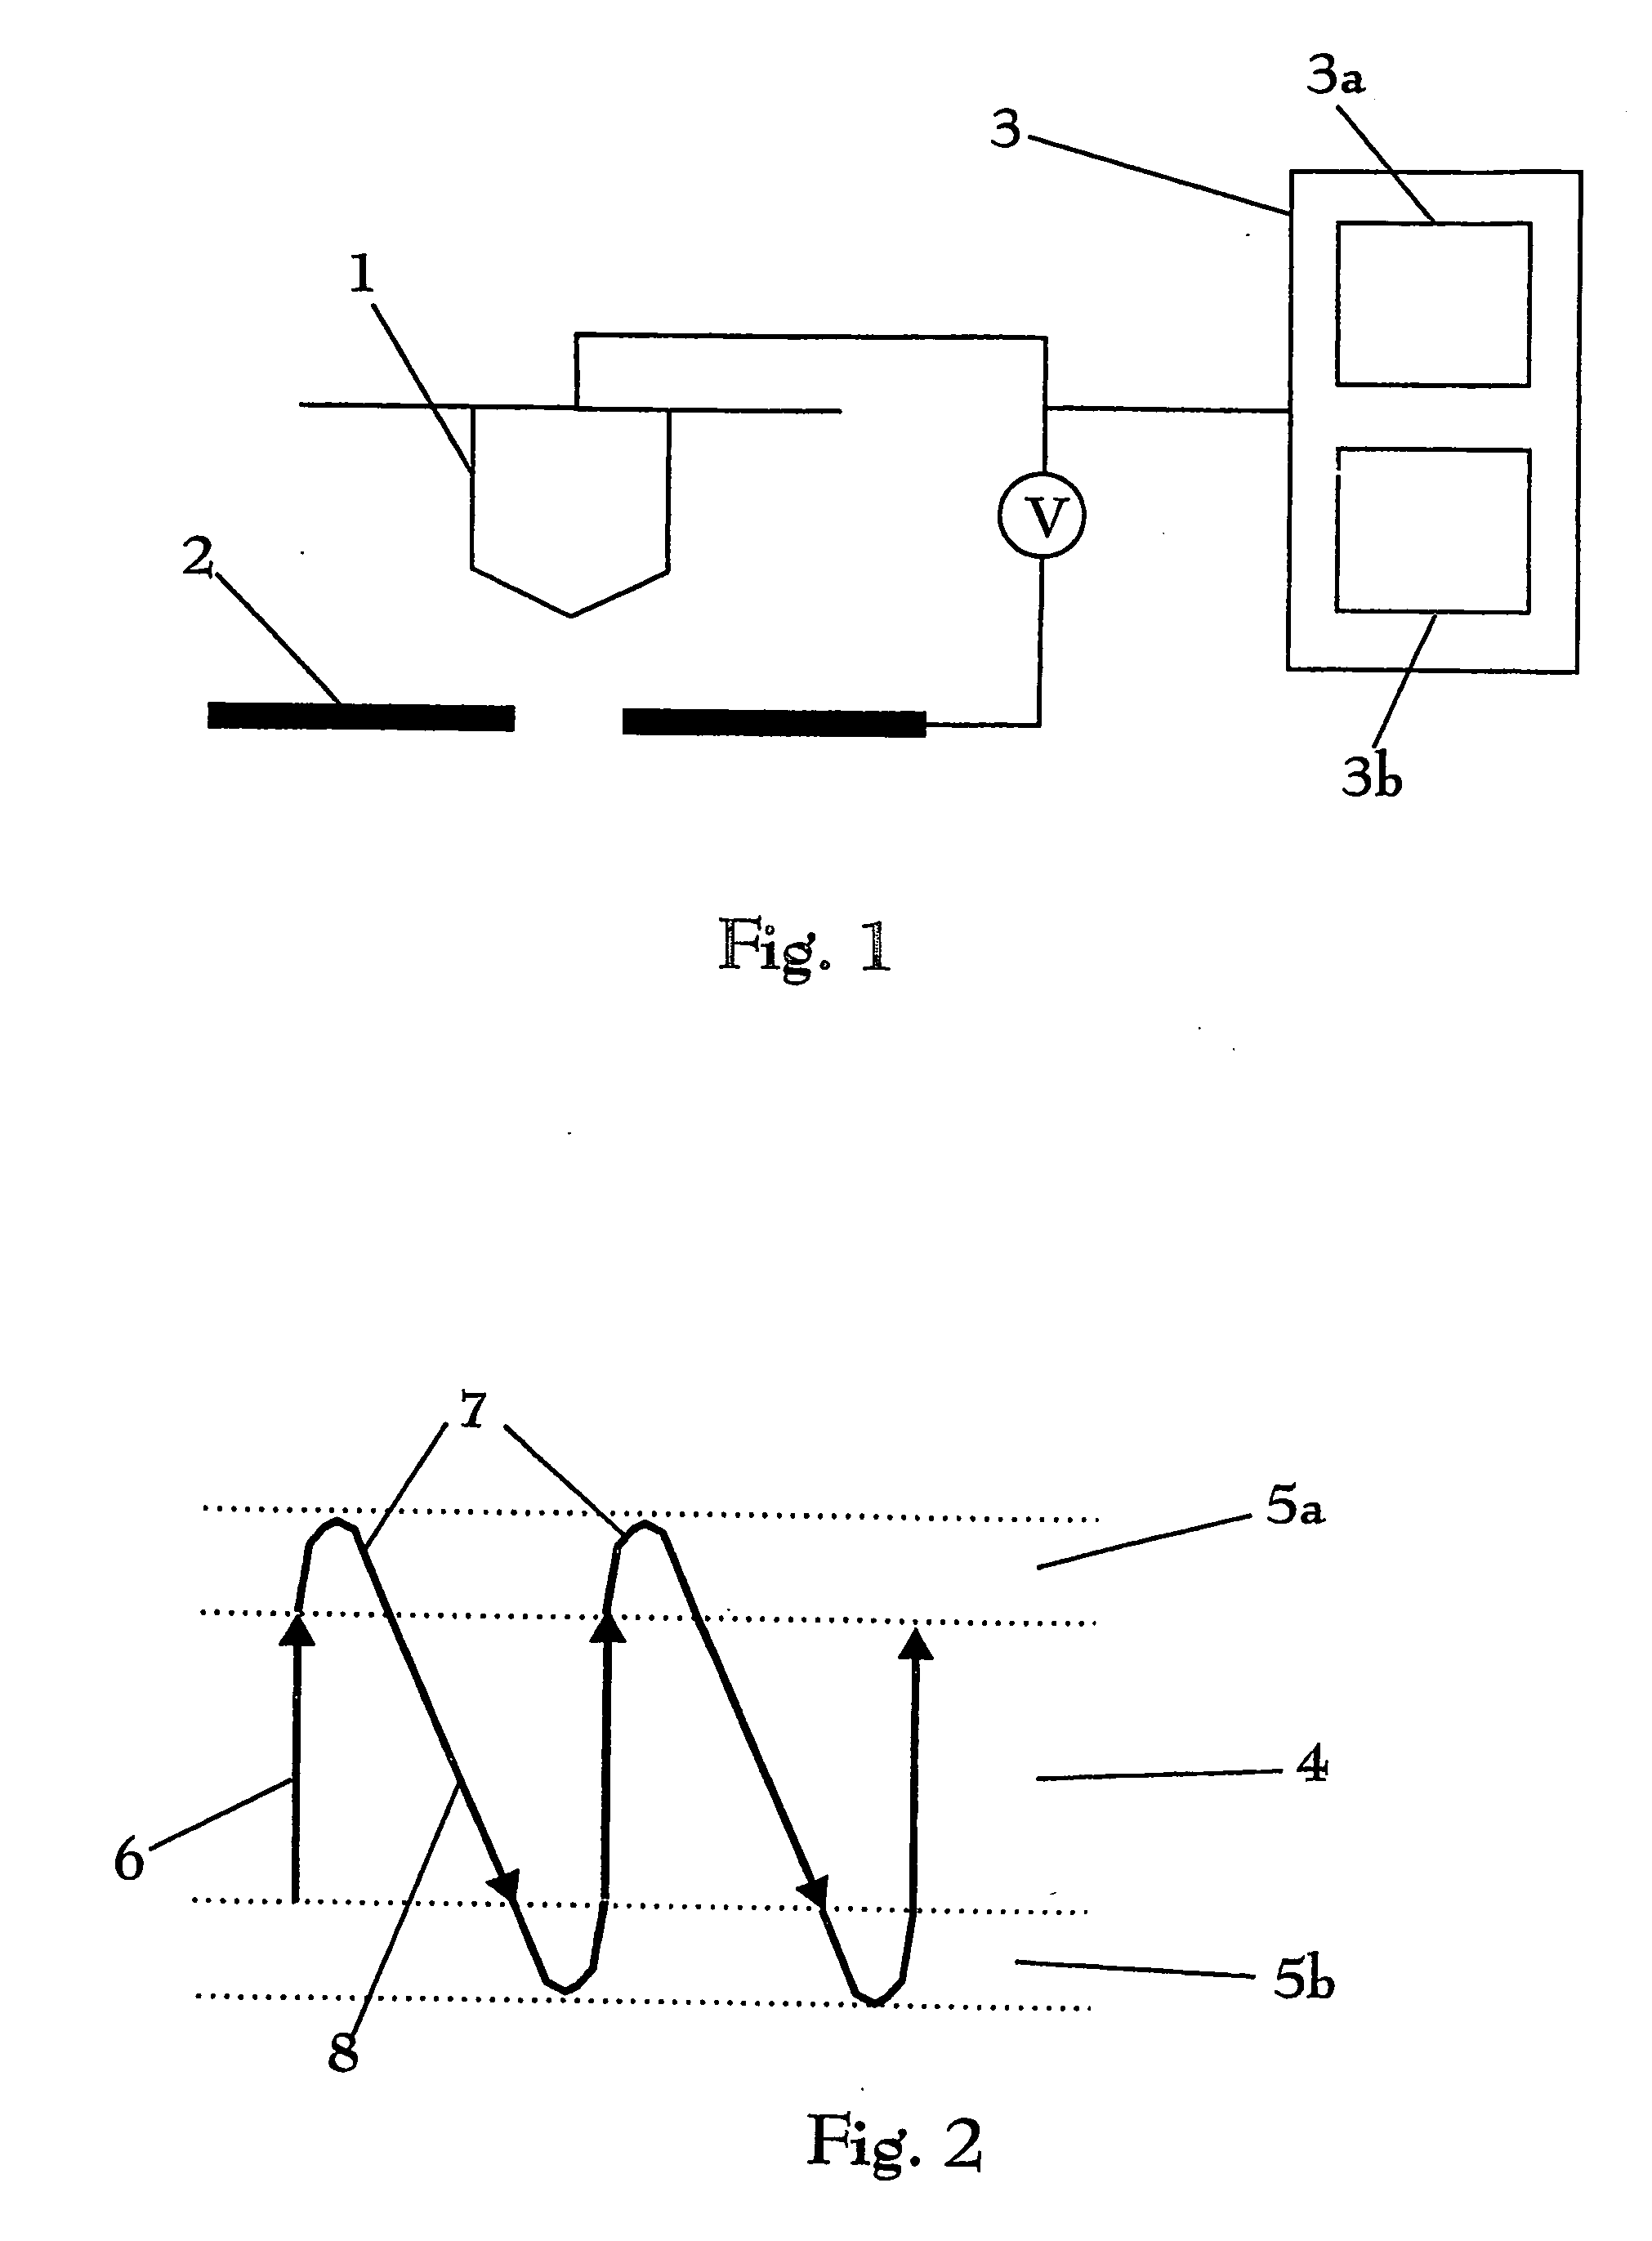 Apparatus and method for controlling the beam current of a charged particle beam